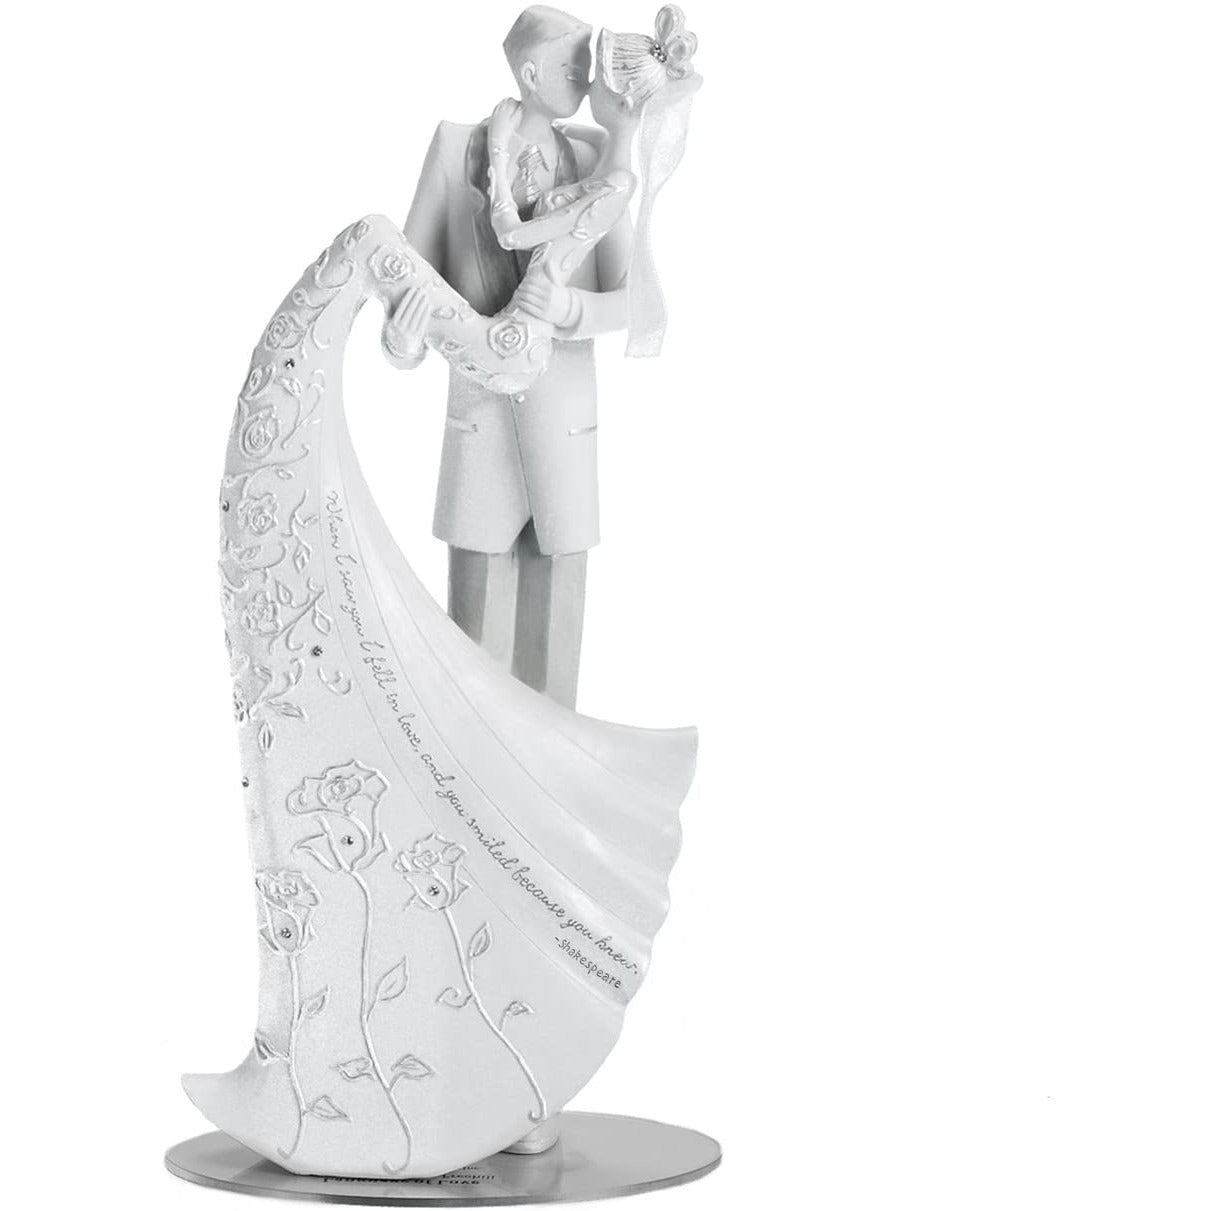 Language of Love "The Kiss" Cake Topper, 9-Inch